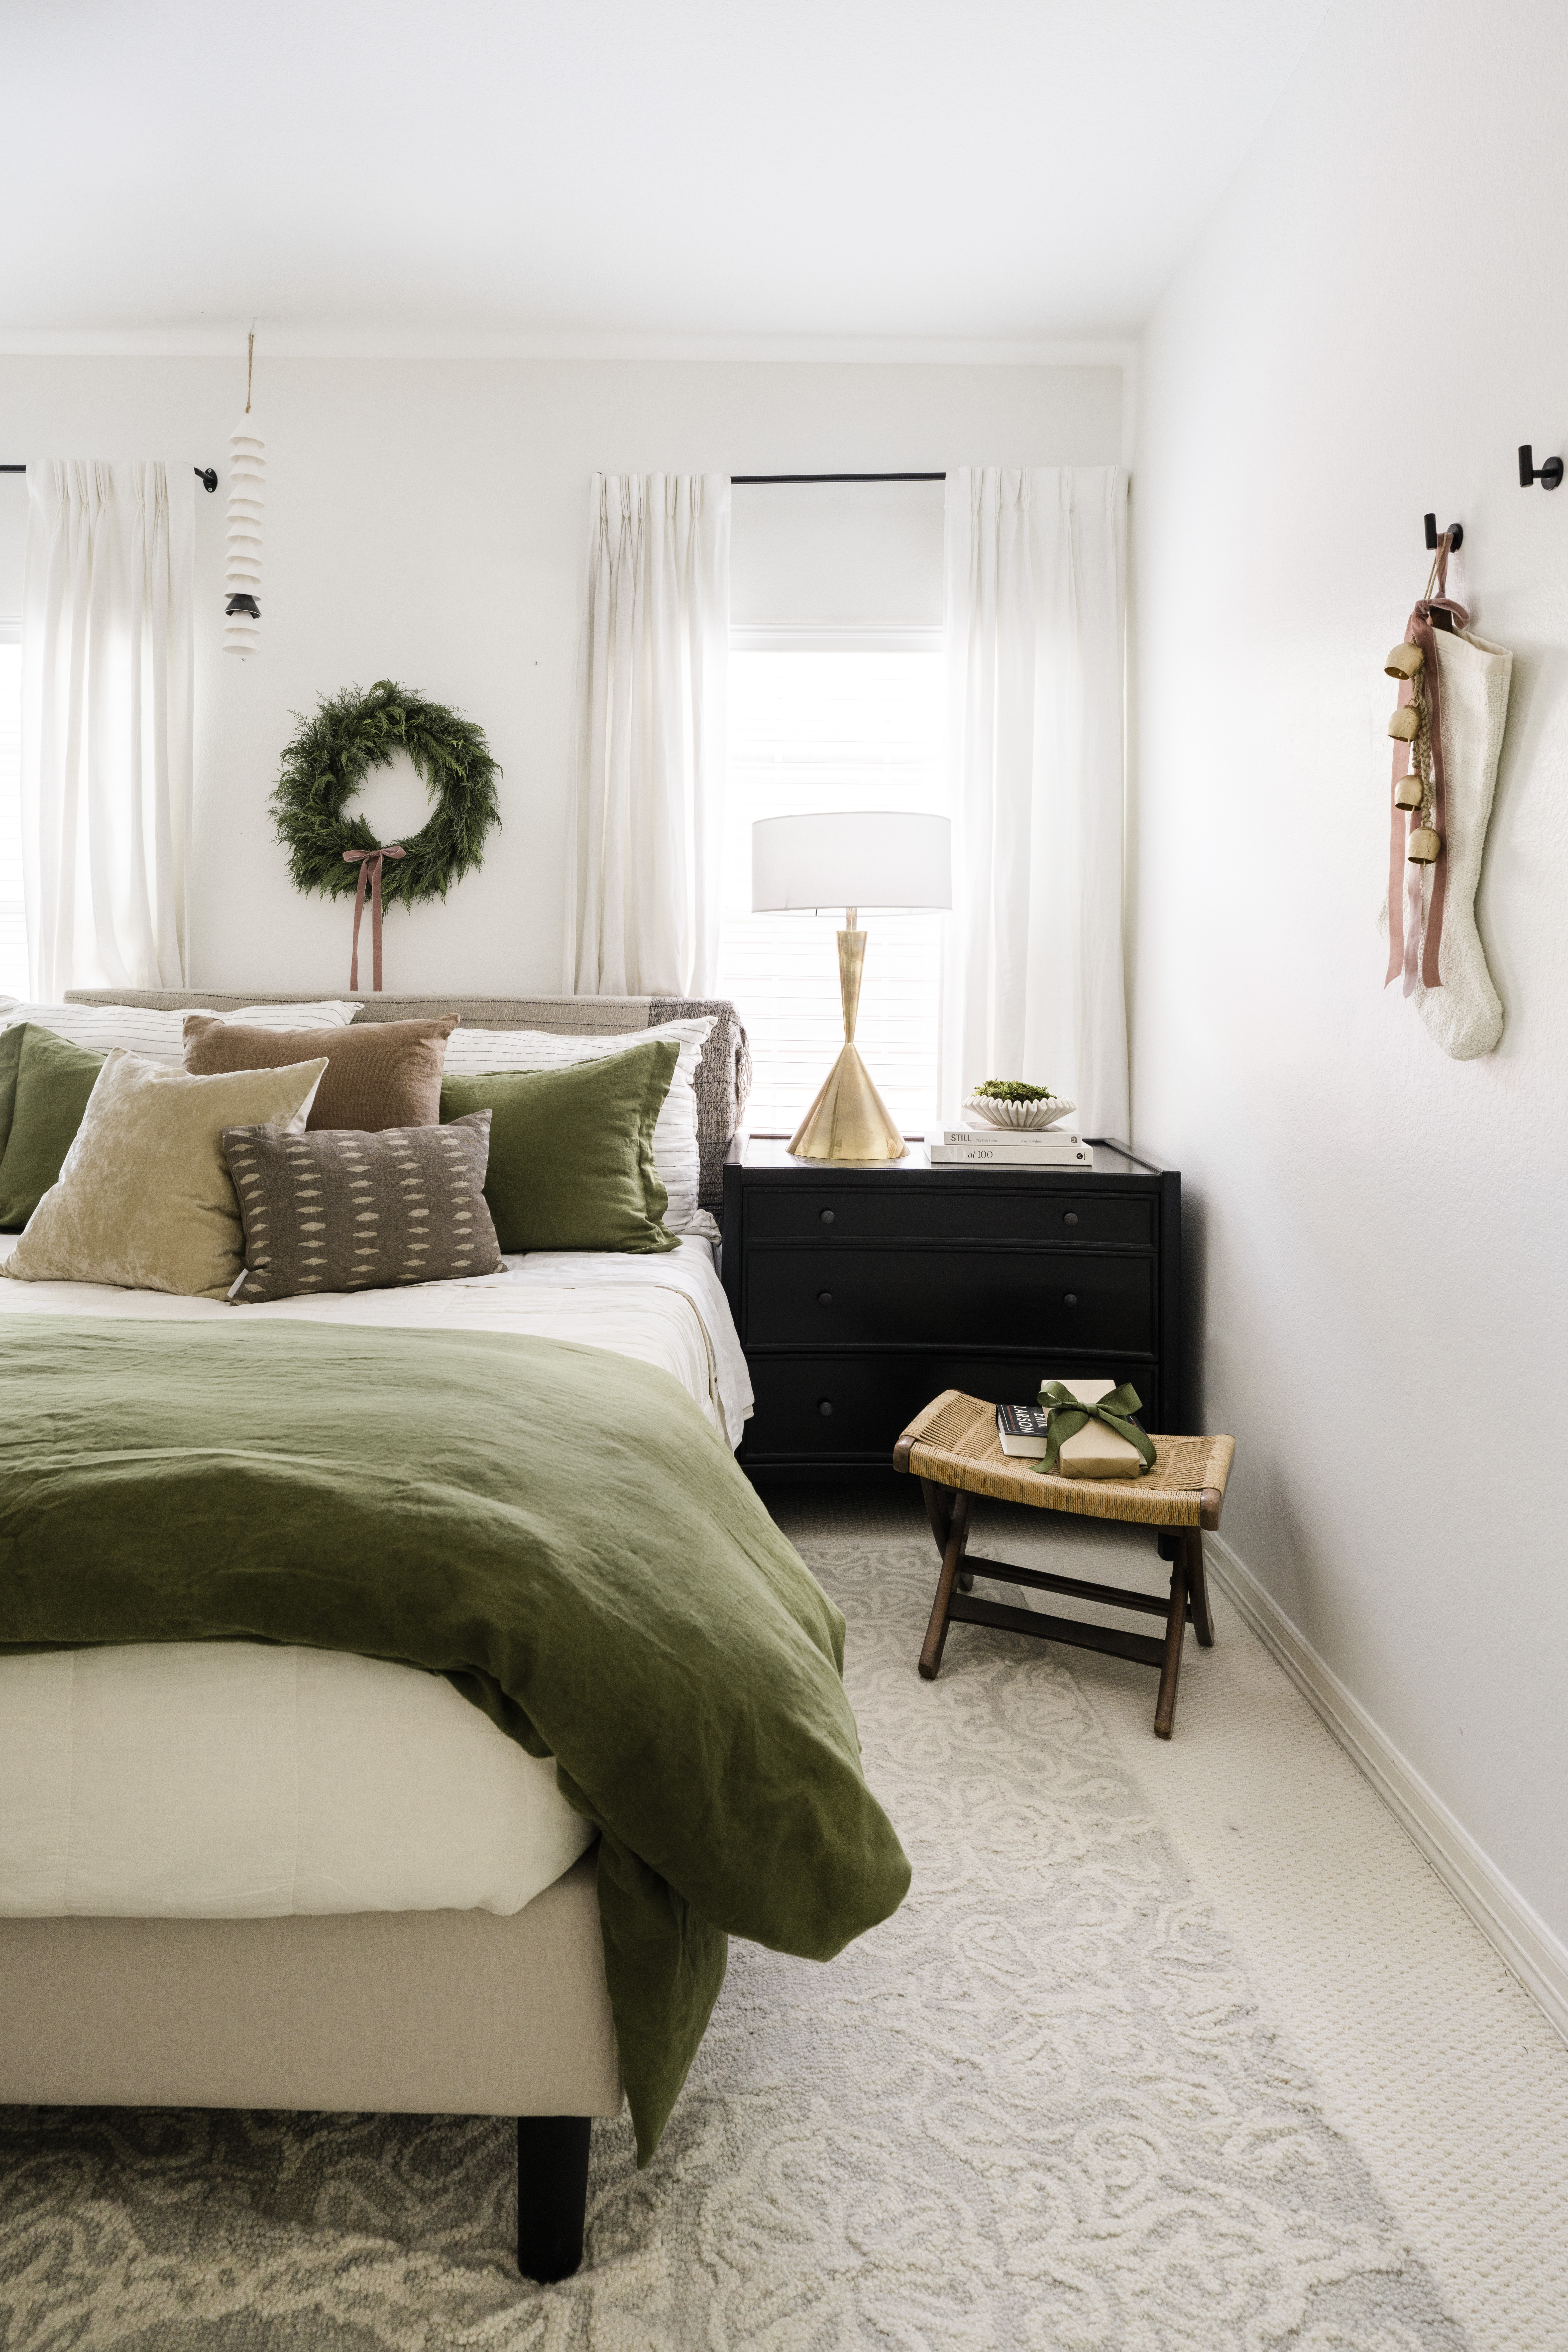 Wrapping Up the Year With A Christmas Home Tour Worthy Of The Occasion | lark & linen